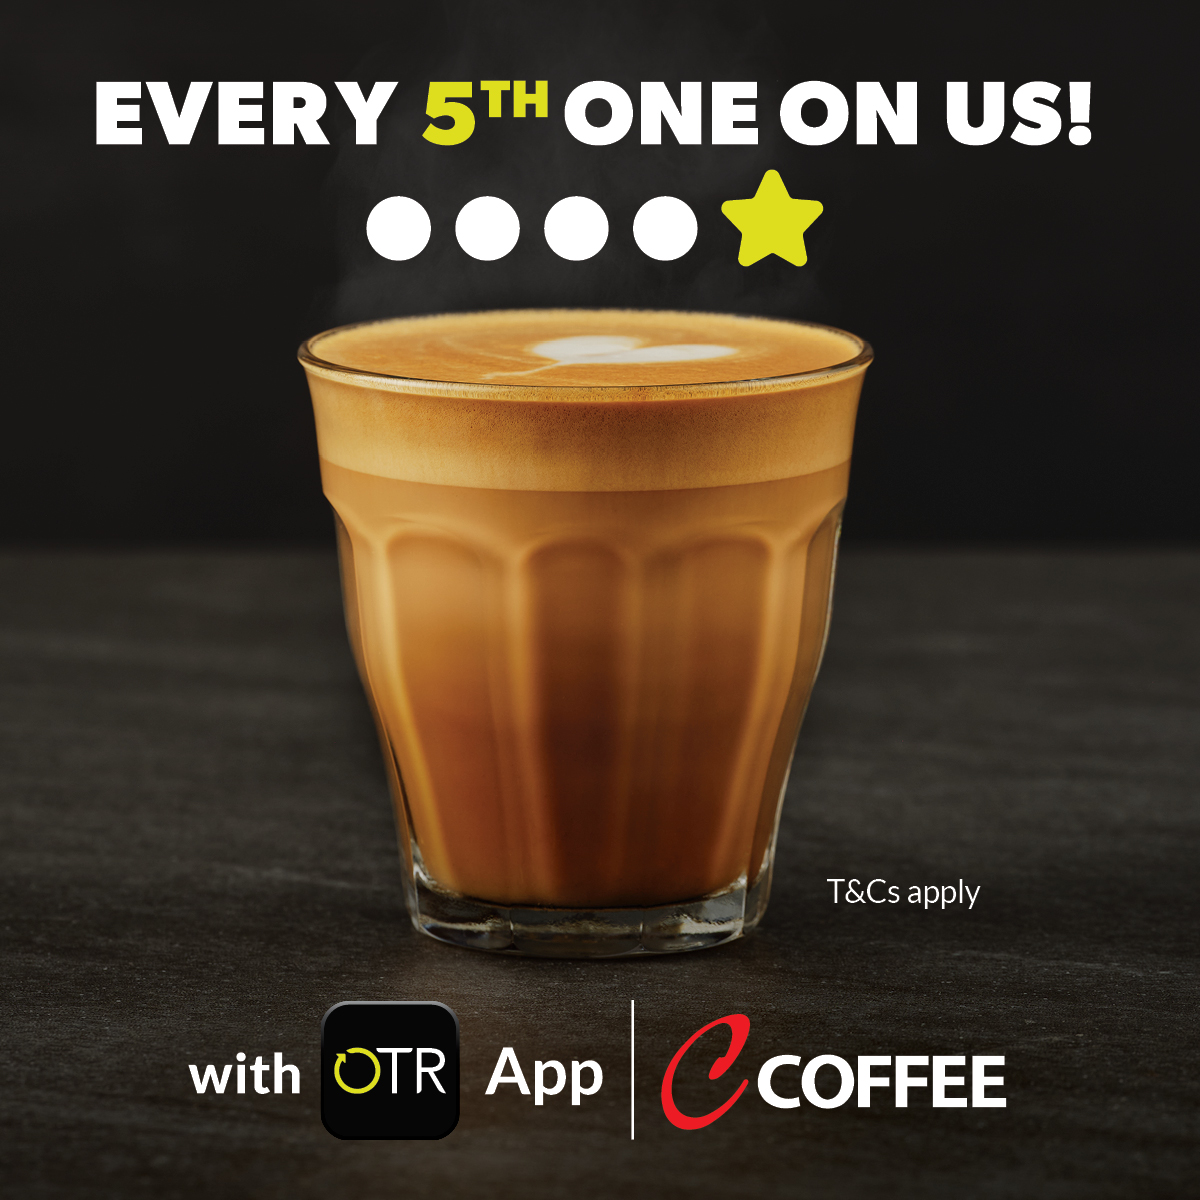 R1 2024-2025 Coffee Every 5th Free - OTR Website Specials 500x500px FINAL